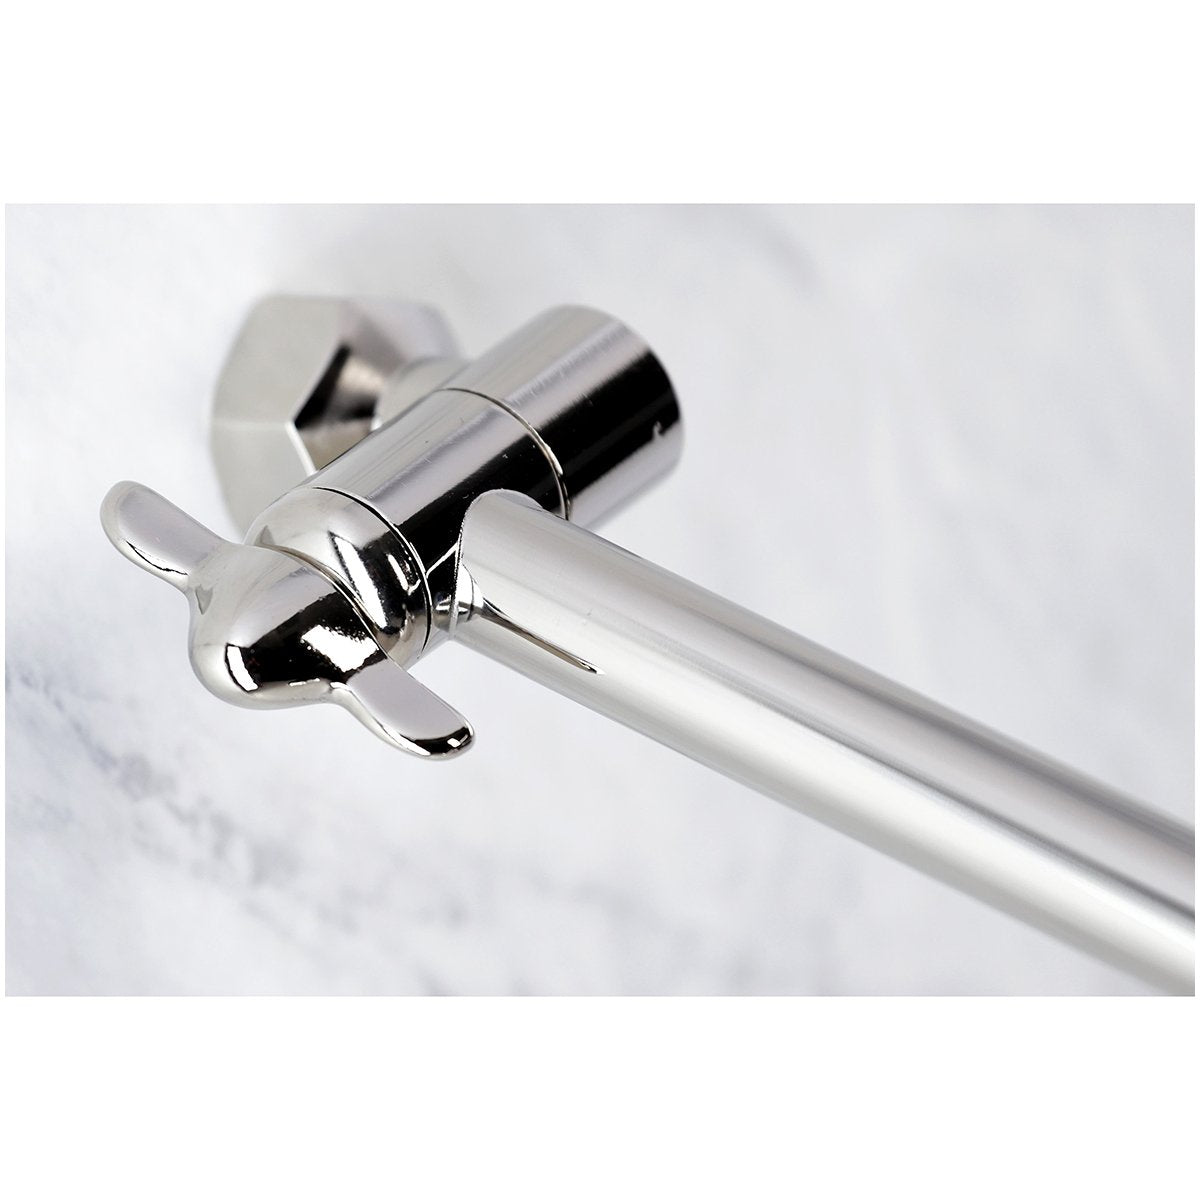 Kingston Brass Victorian Shower Head with Adjustable Shower Arm in Polished Nickel